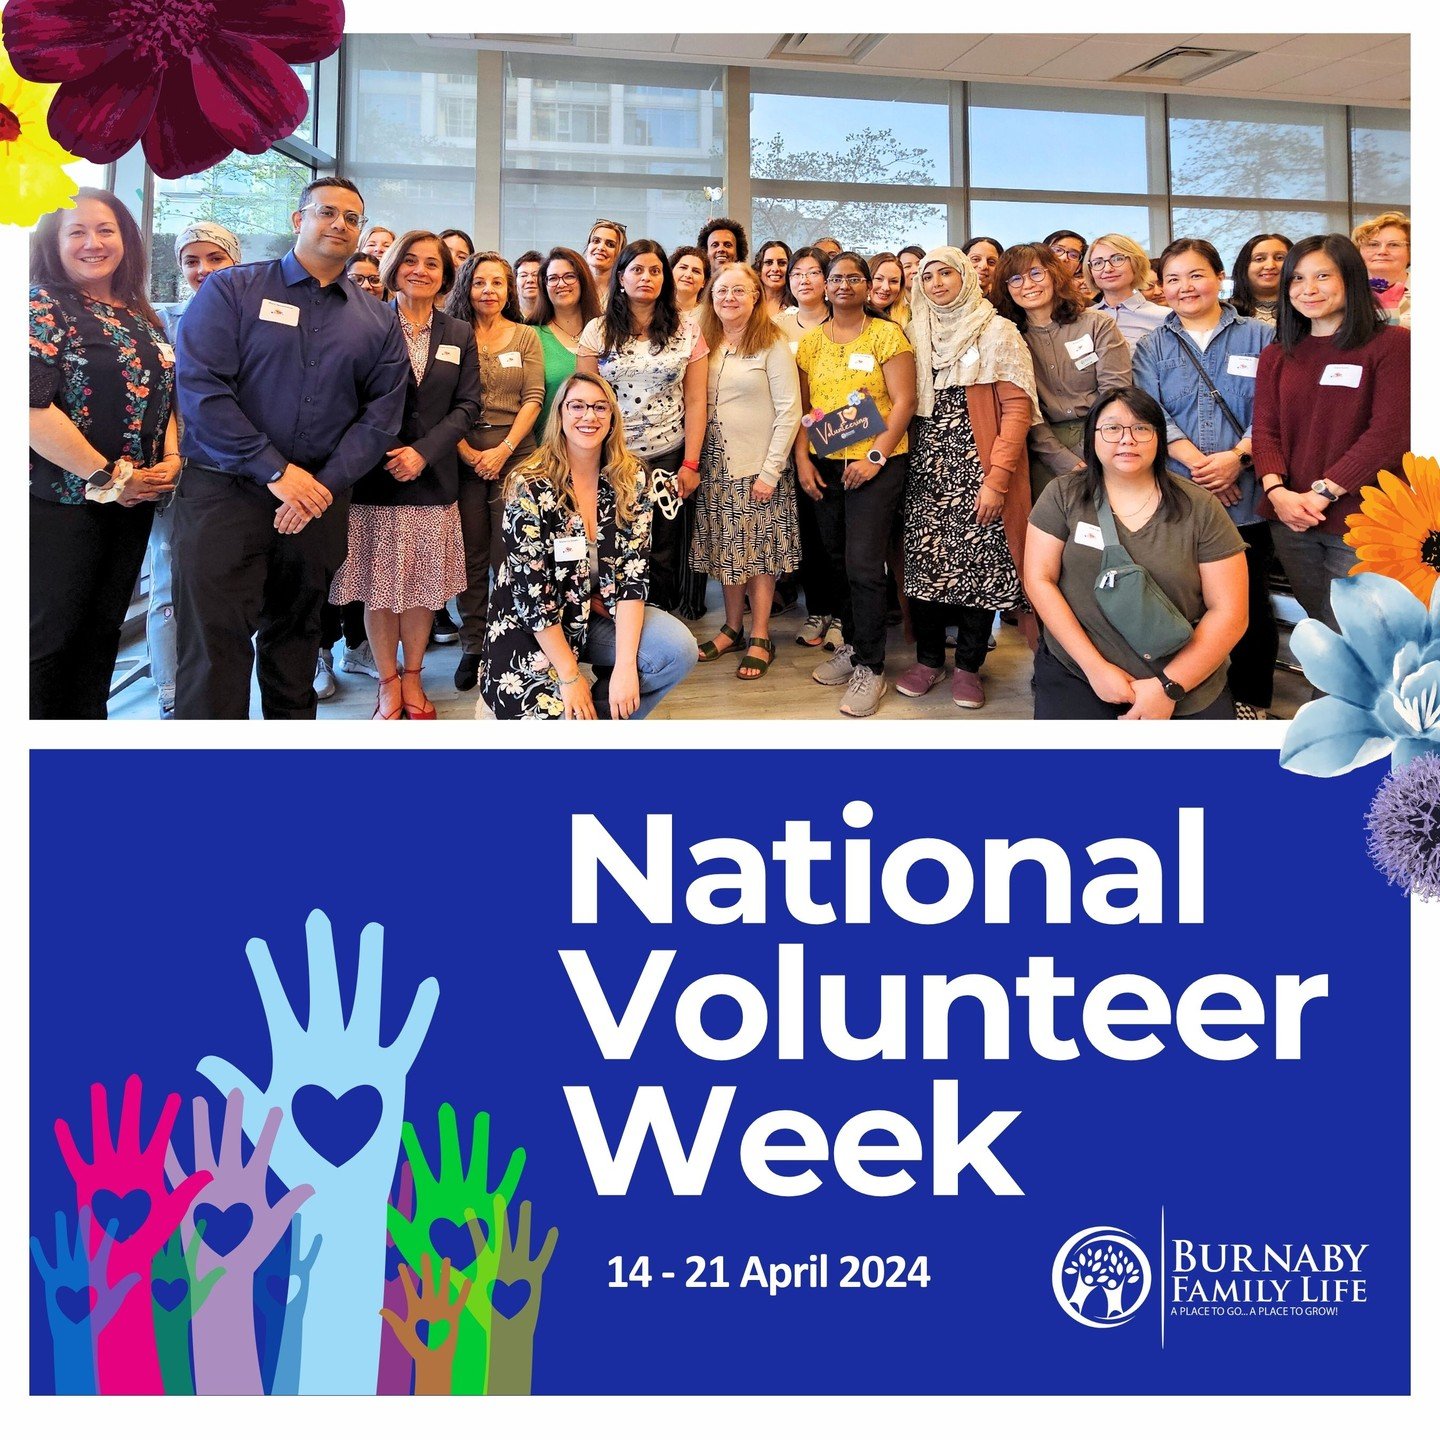 🌟 A heartfelt thank you to all our incredible volunteers! 🌟

Your dedication and commitment to our organization make a world of difference every single day. Whether it's lending a helping hand at events, providing support to our children and famili